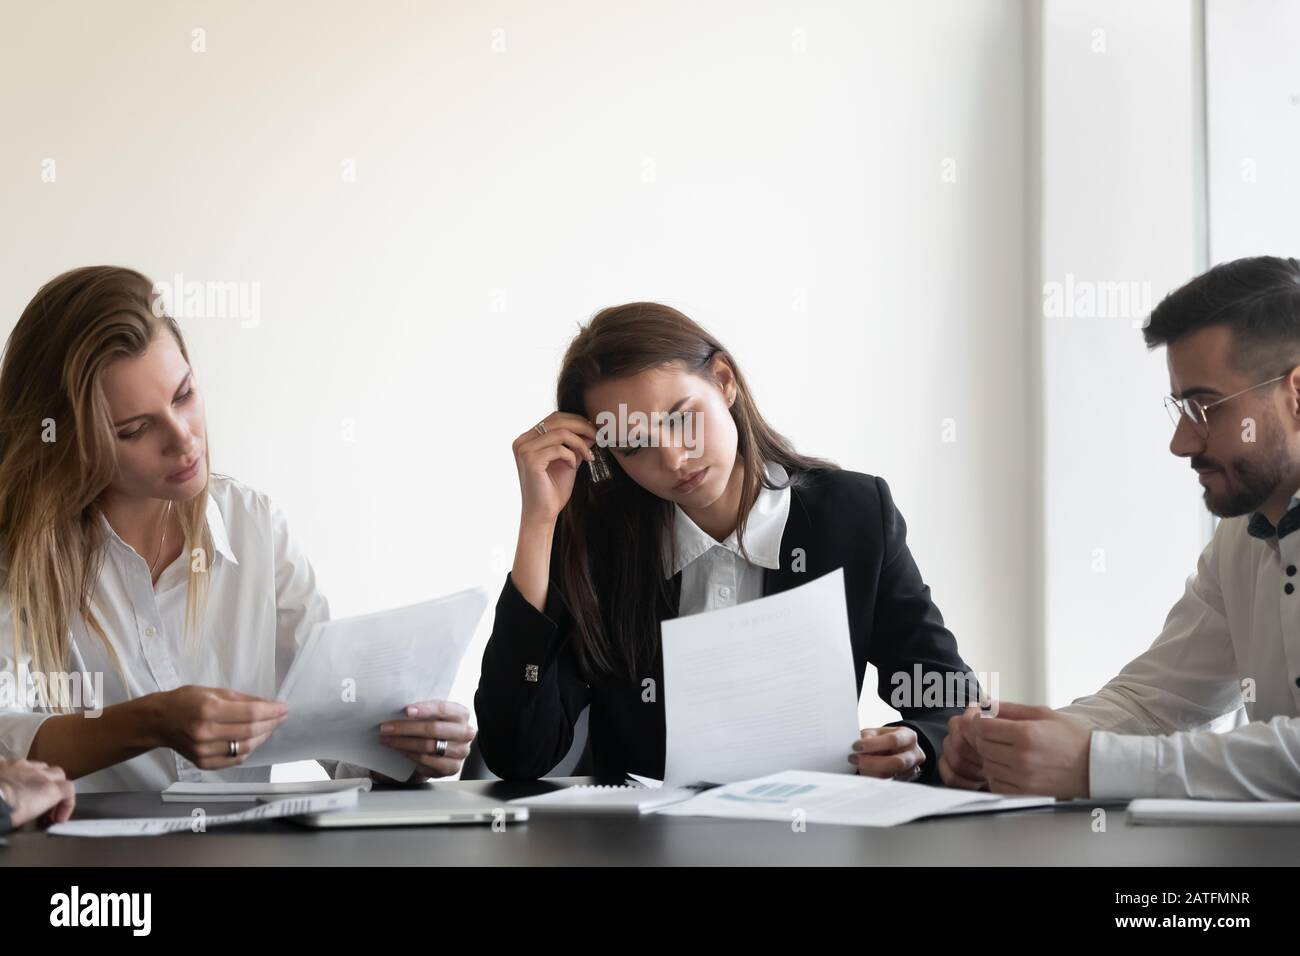 Upset businesspeople sit at desk looking dissatisfied reading financial report Stock Photo